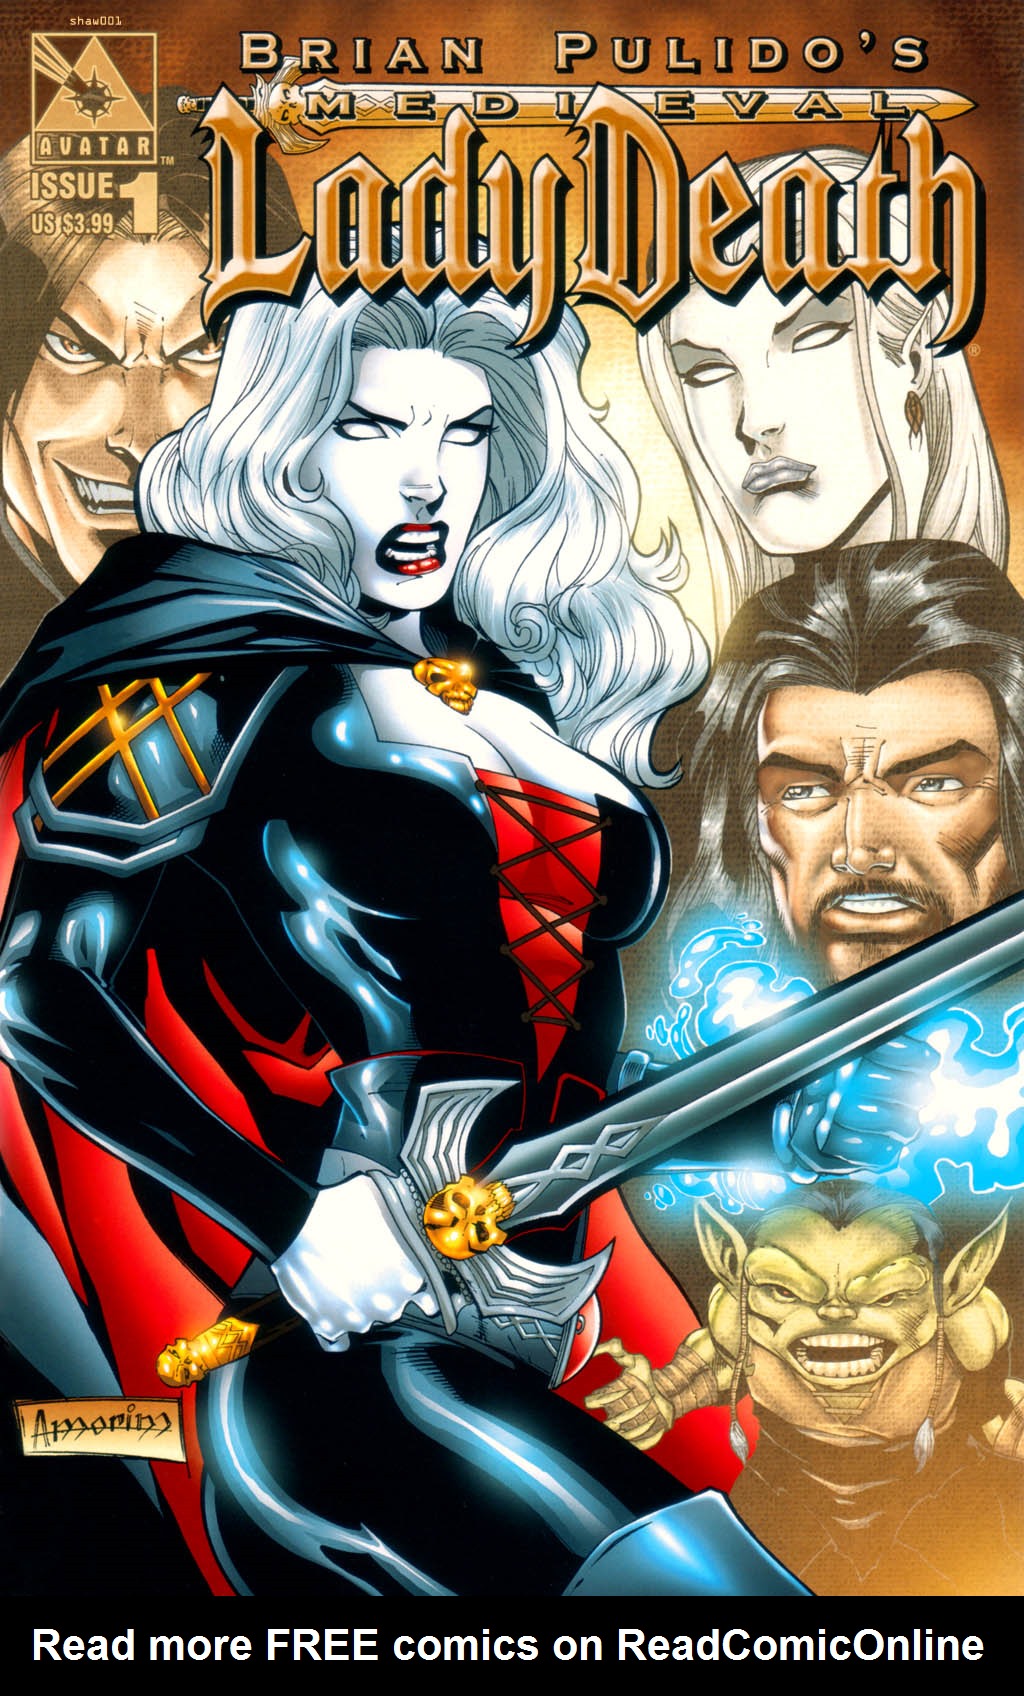 Read online Brian Pulido's Medieval Lady Death comic -  Issue #1 - 1